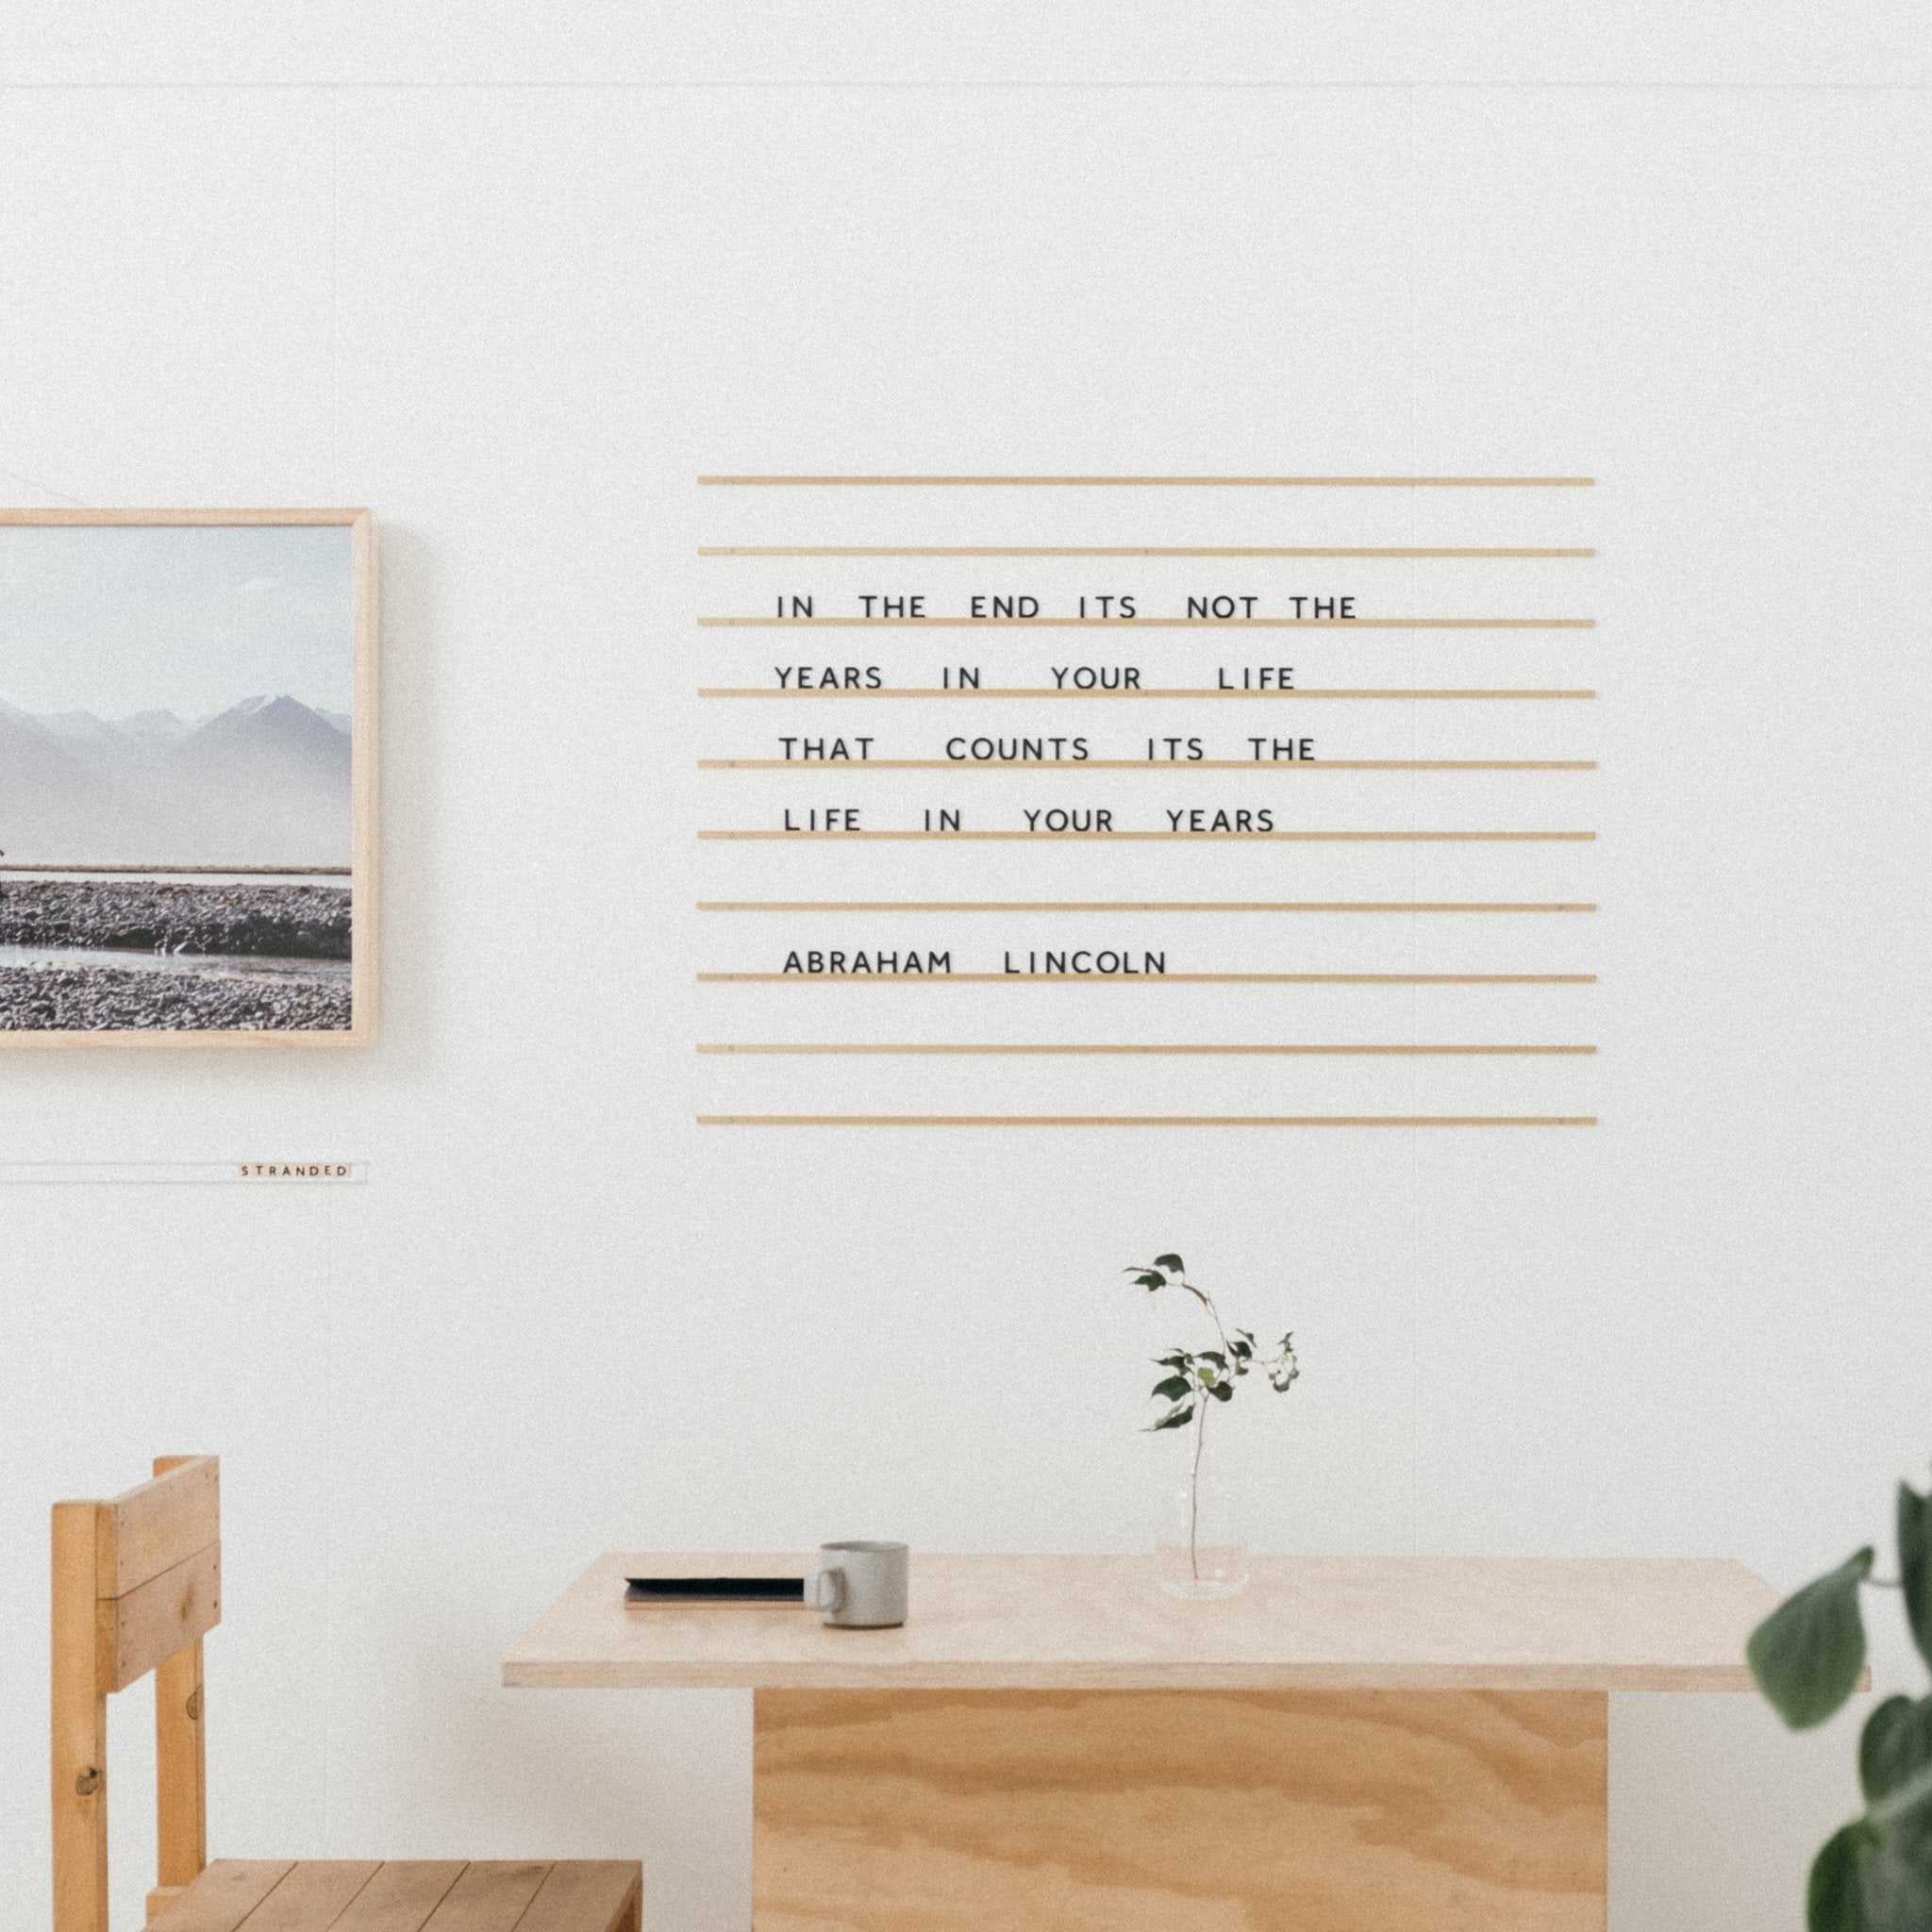 4 Ways to Use the Atelier Letter Board